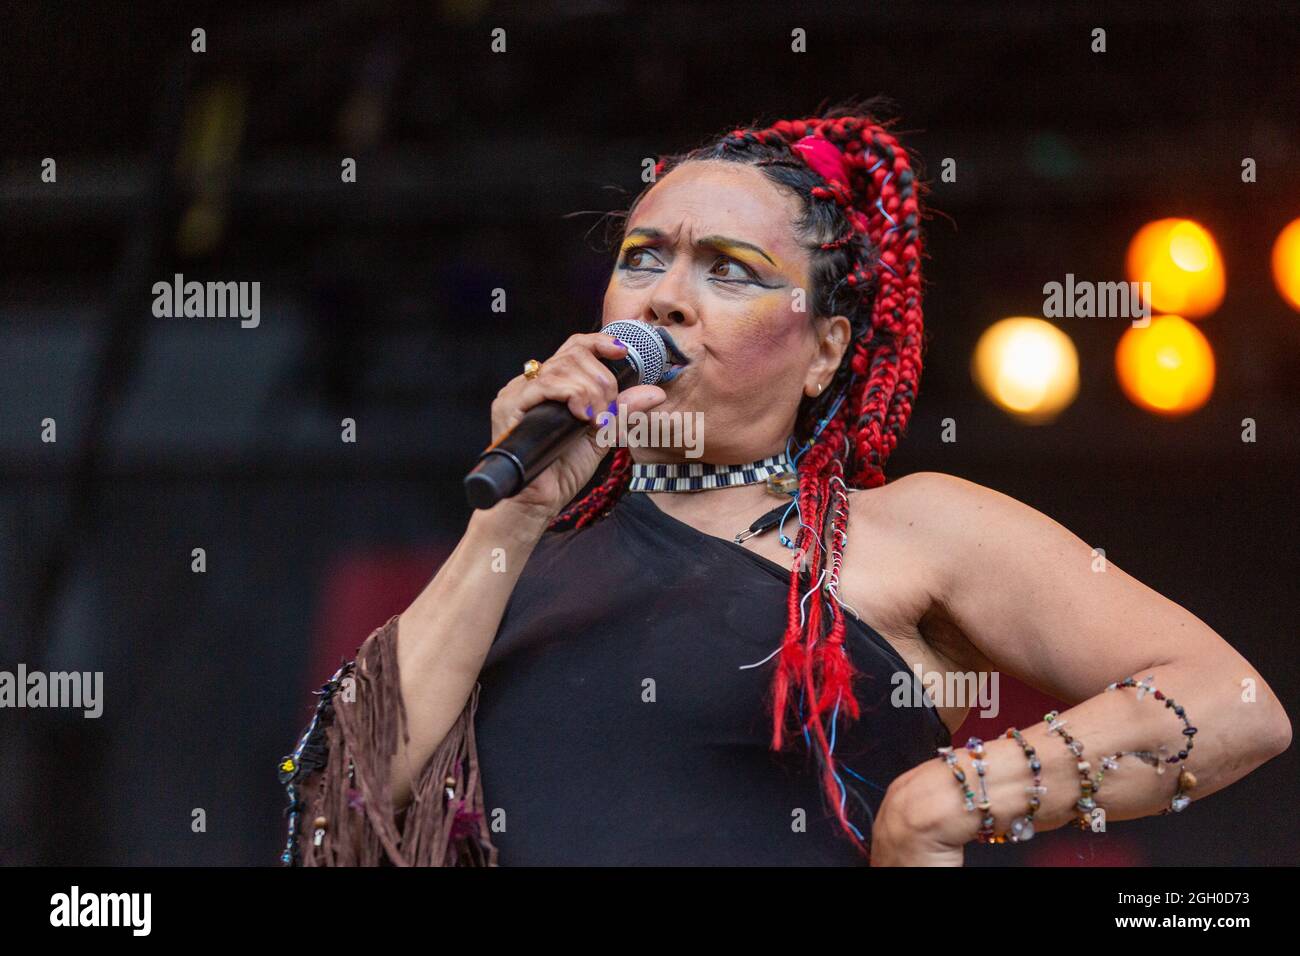 Milwaukee, USA. 03rd Sep, 2021. Annabella Lwin of Annabella's Bow Wow Wow during the Summerfest Music Festival on September 3, 2021, in Milwaukee, Wisconsin (Photo by Daniel DeSlover/Sipa USA) Credit: Sipa USA/Alamy Live News Stock Photo